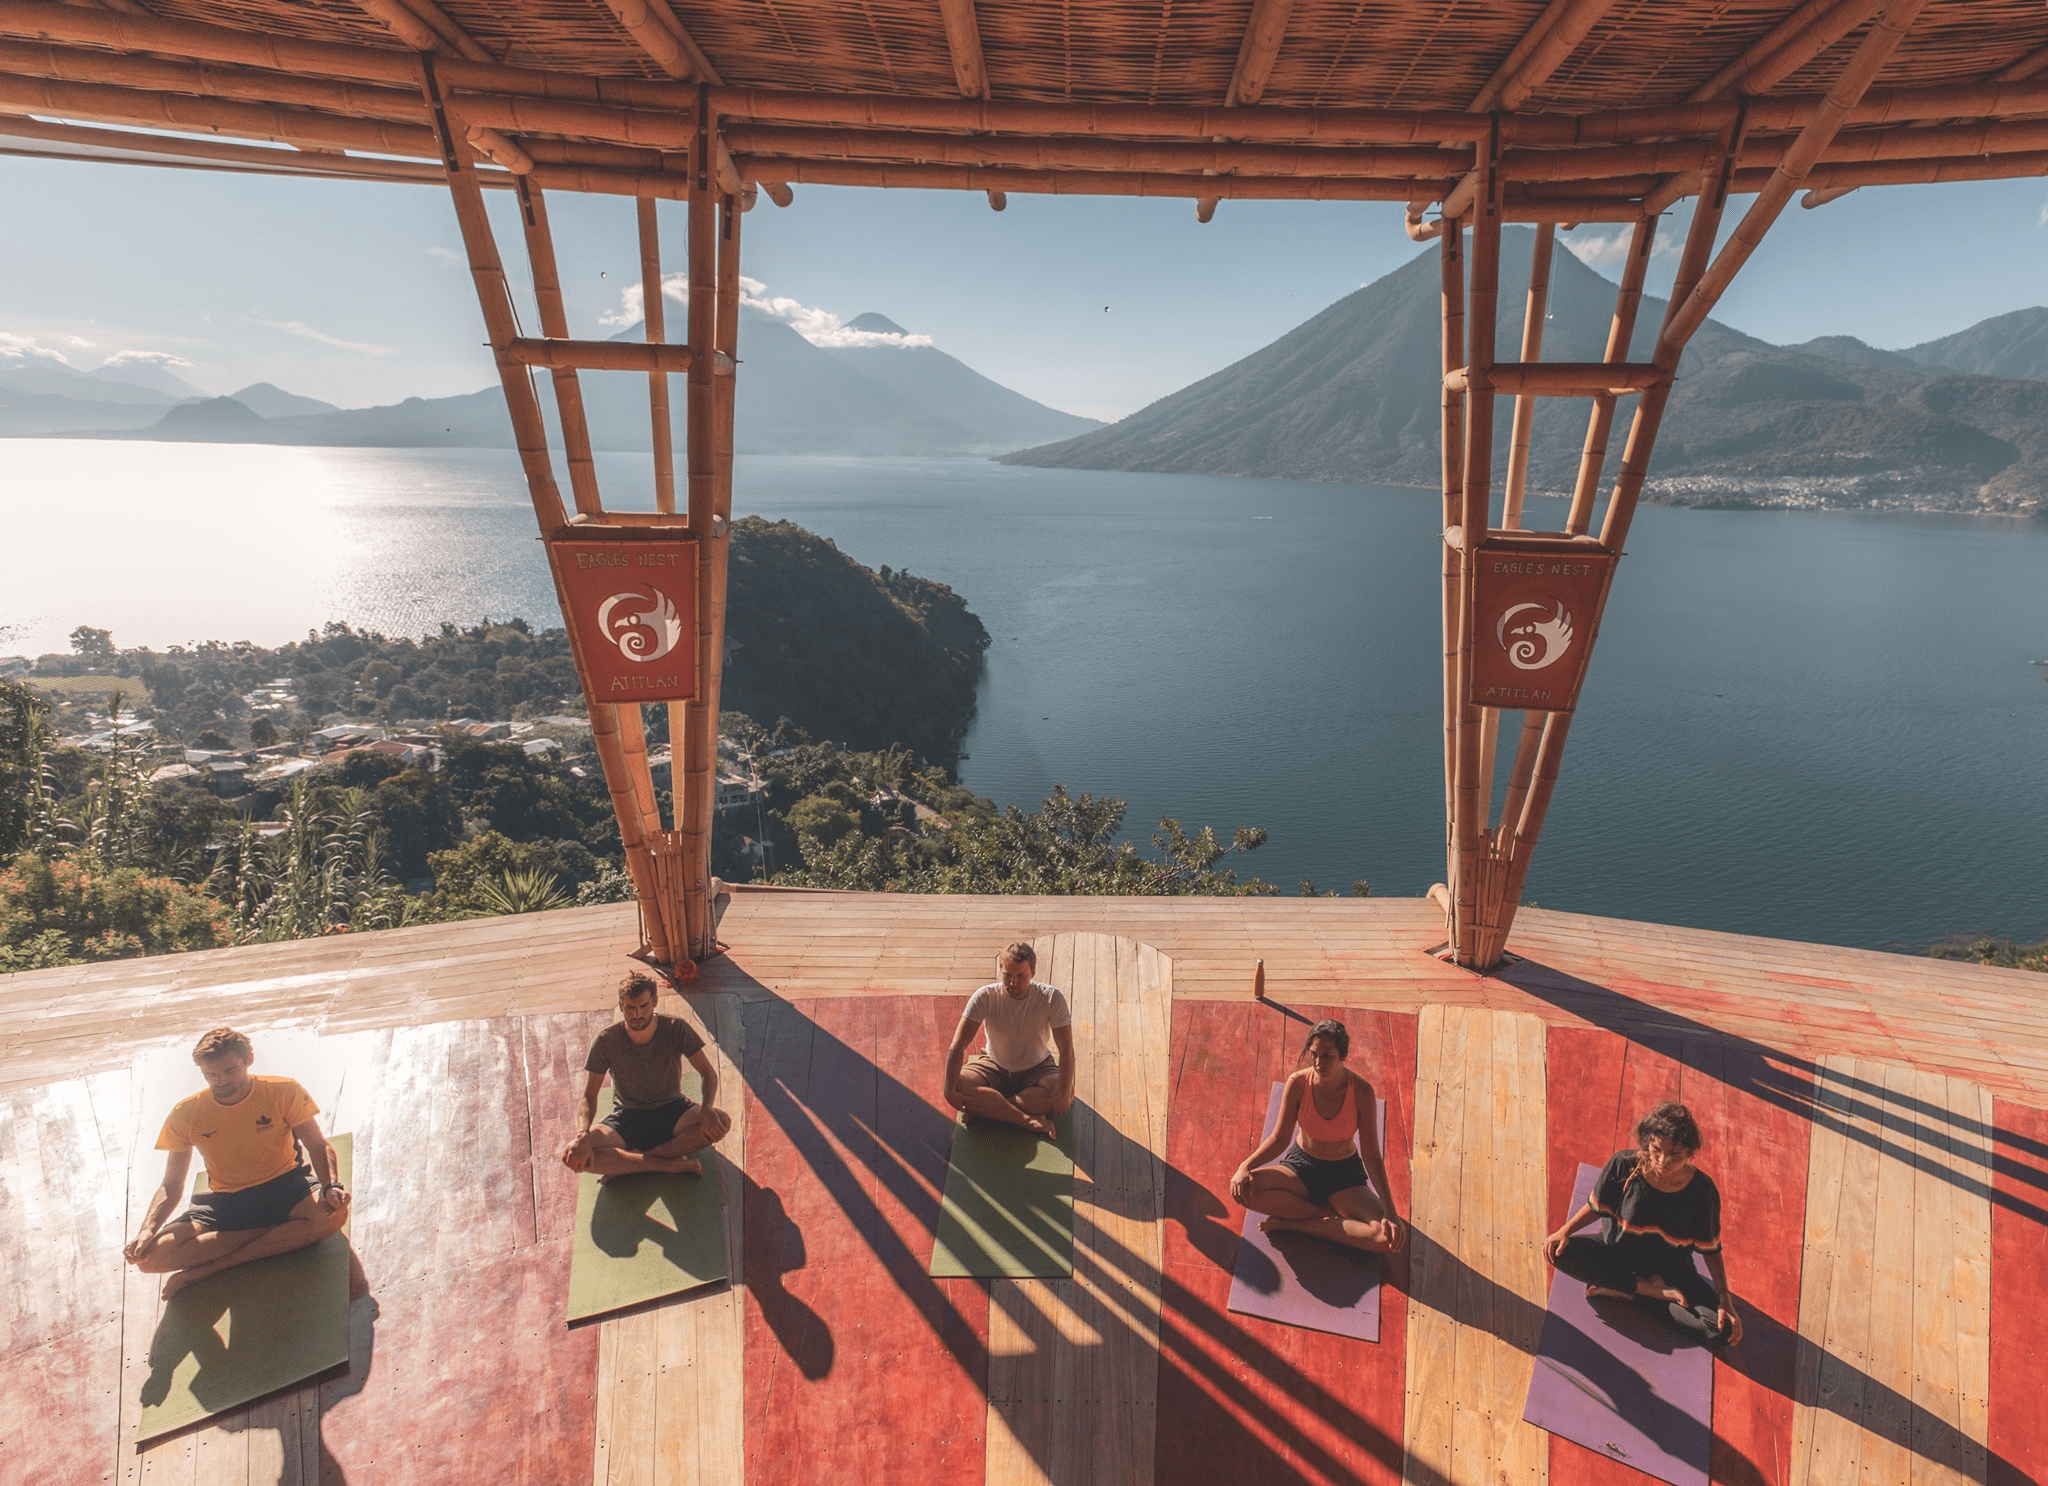 Yogis meditating in the open-air studio at Eagle's Nest. 